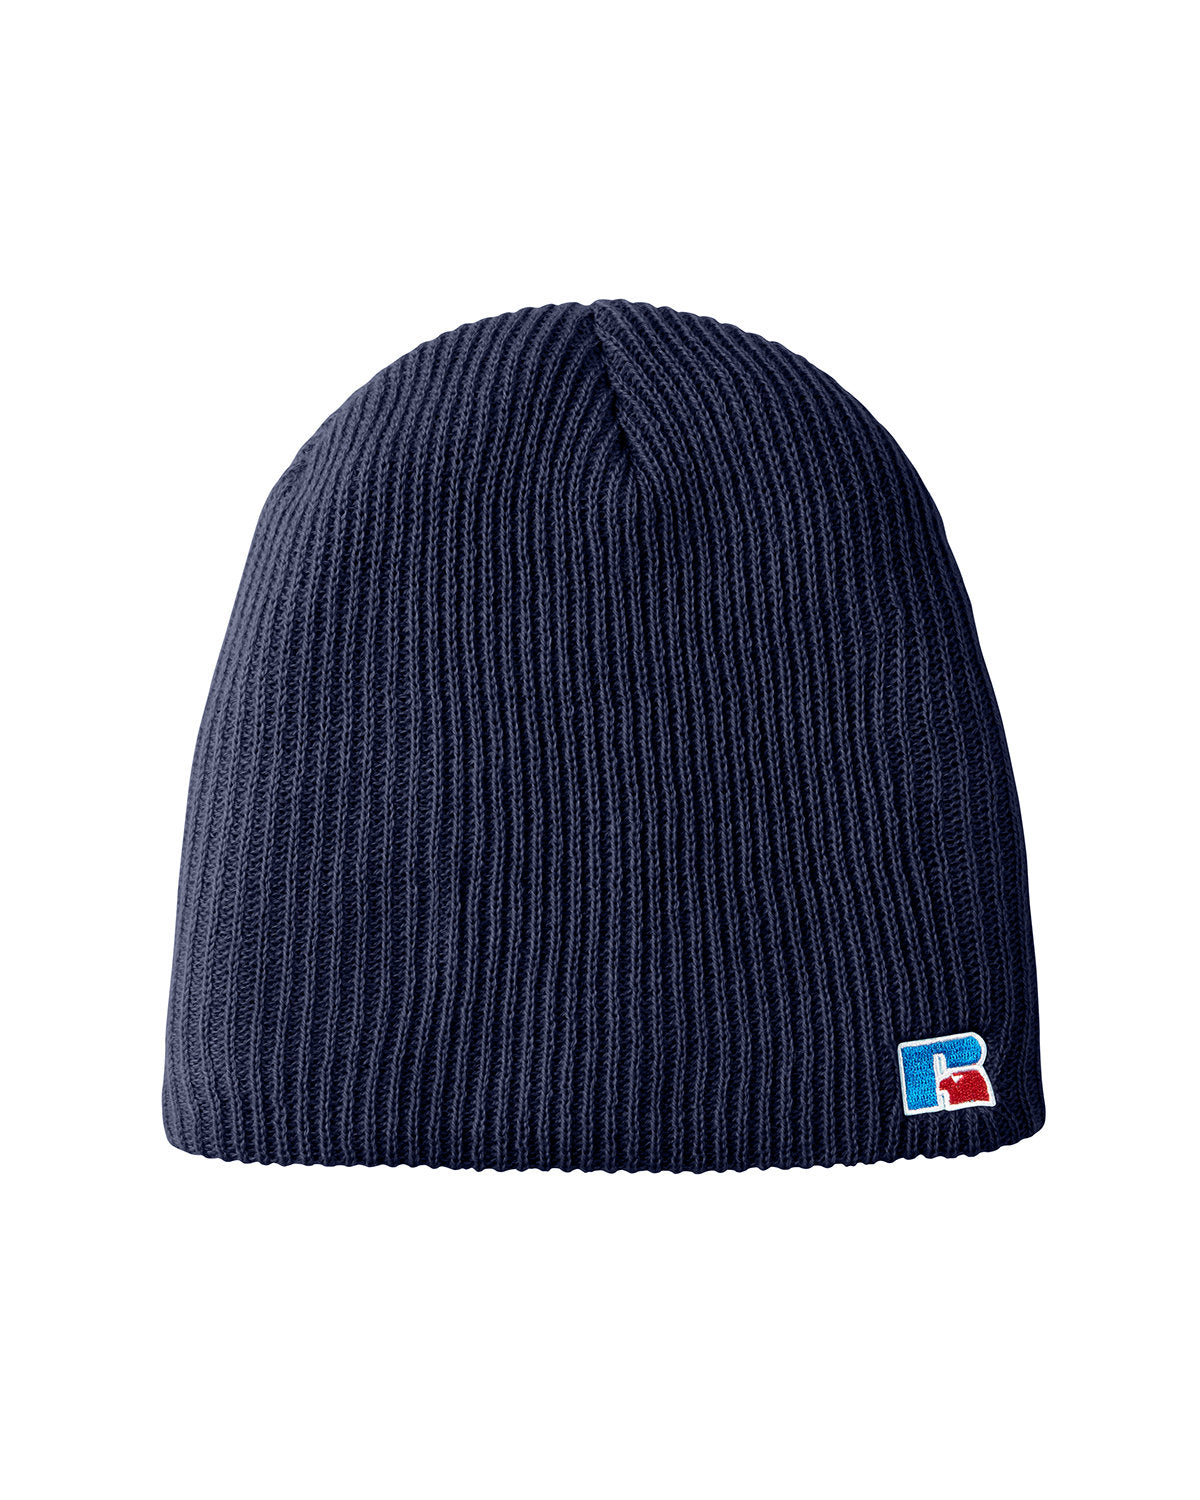 Headwear NAVY OS Russell Athletic